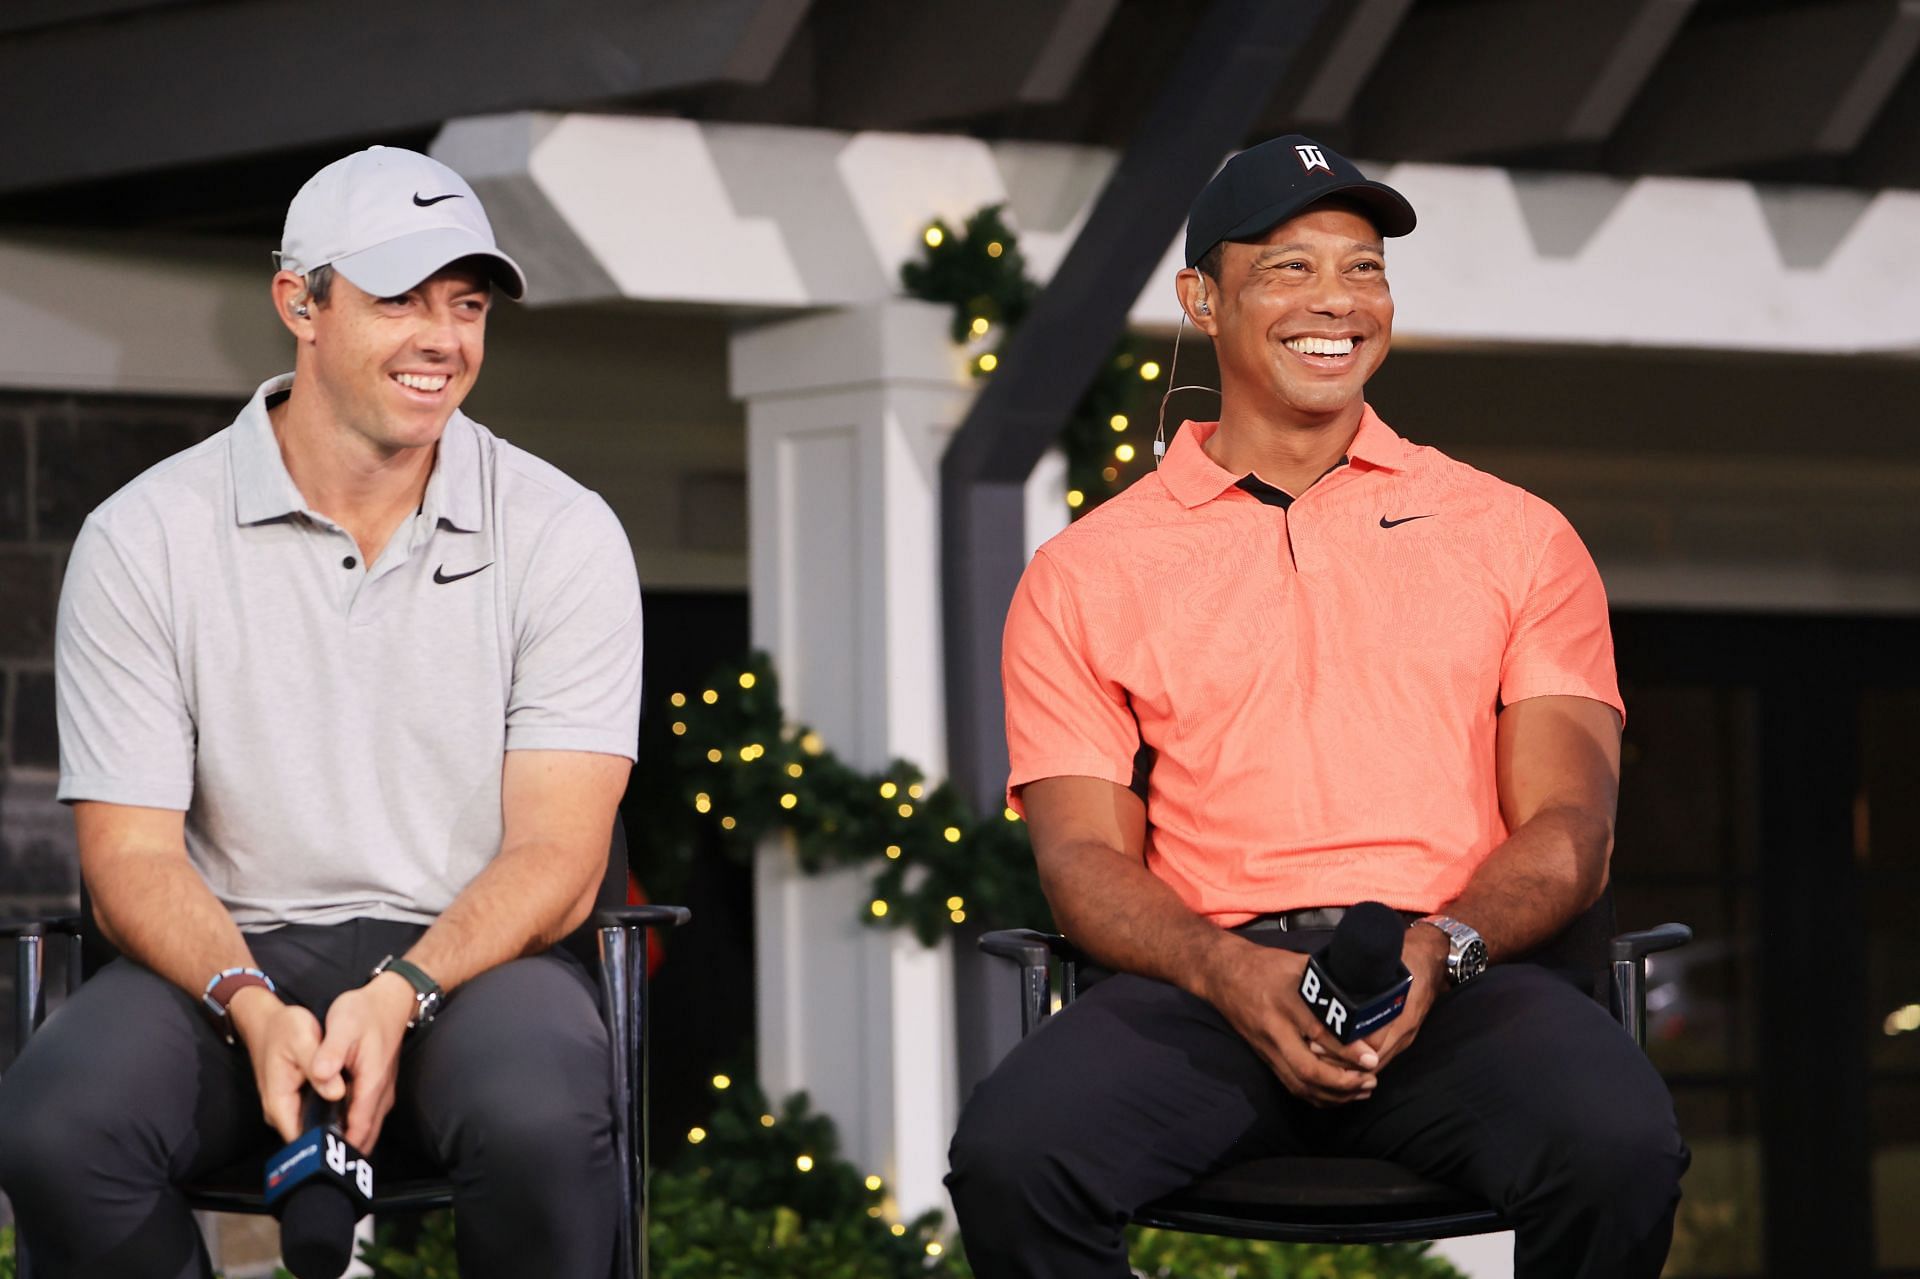 Tiger Woods and Rory McIlroy at The Match 7 at Pelican (Image via David Cannon/Getty Images for The Match)